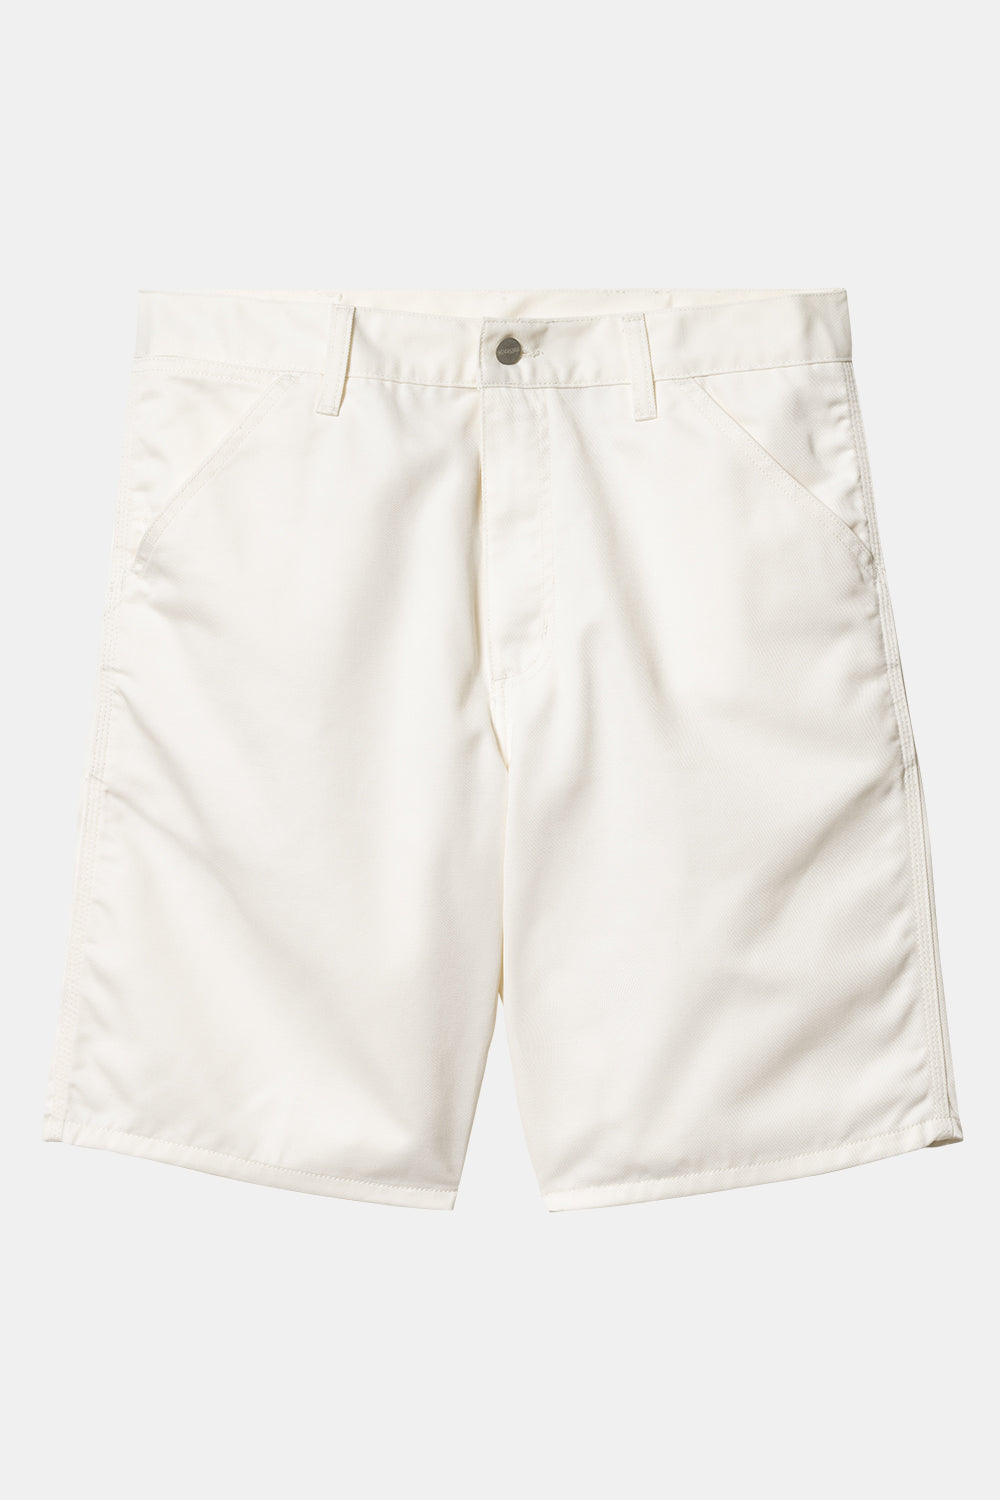 Carhartt WIP Simple Shorts (Wax White) | Number Six